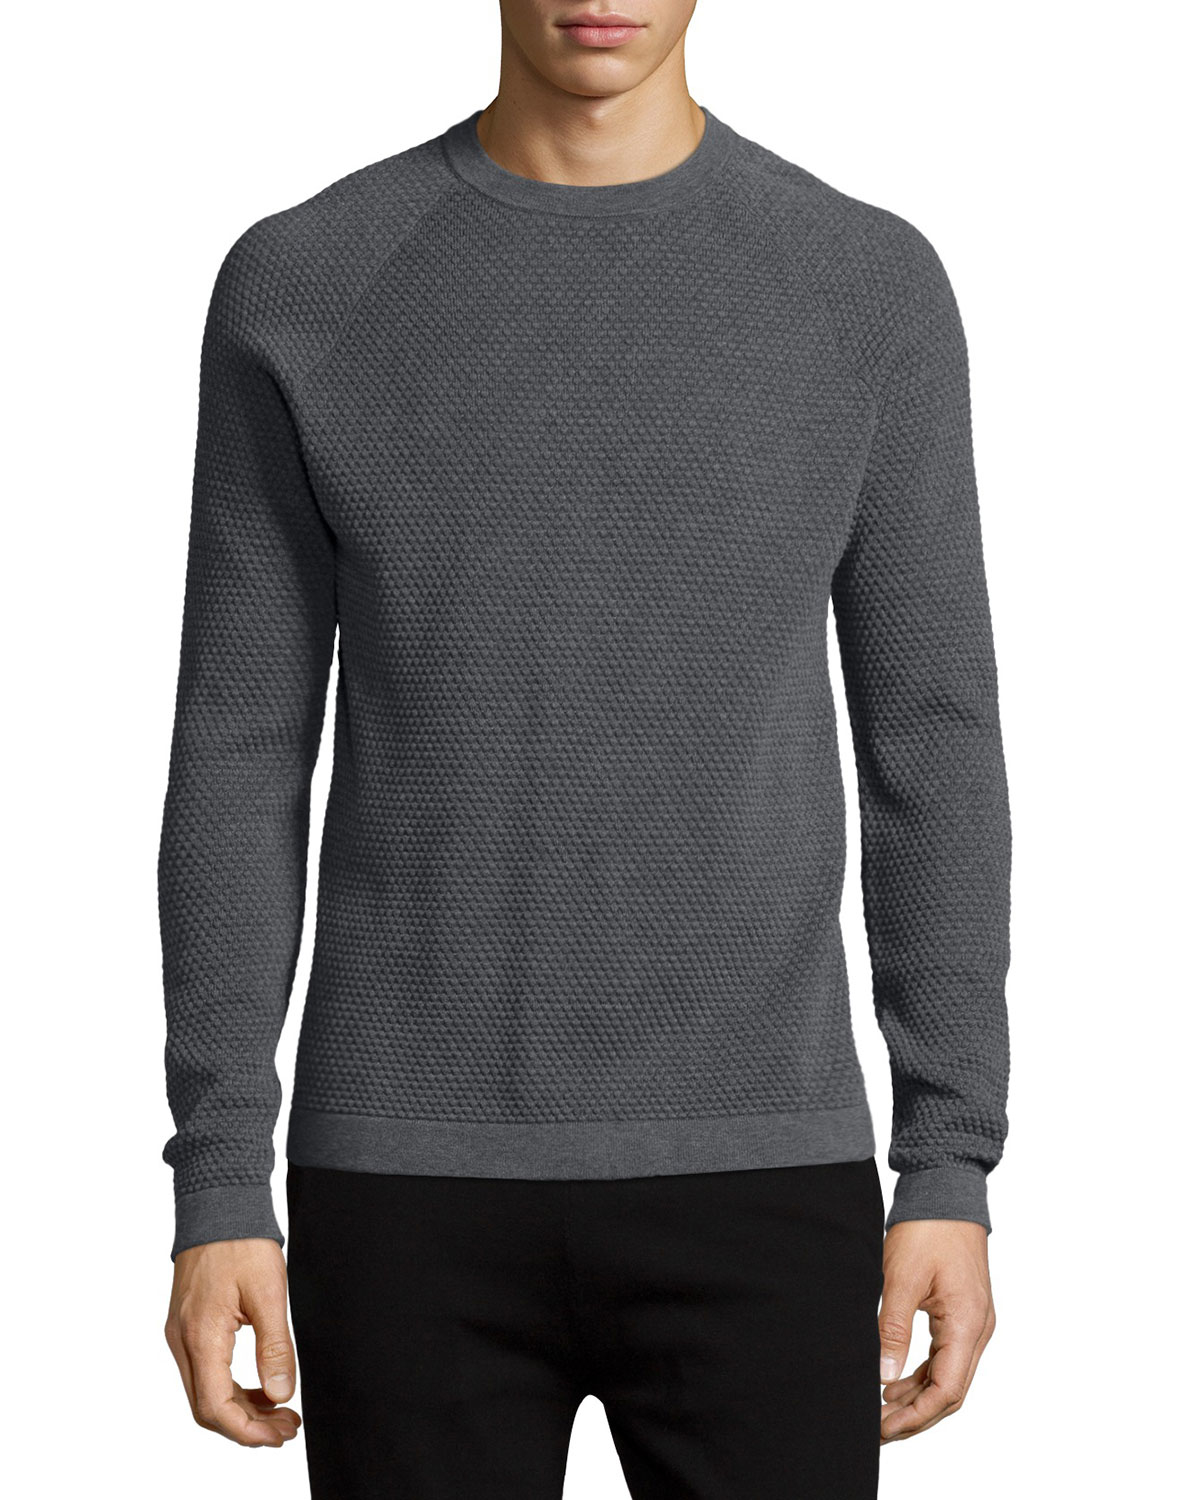 Theory Ednae Textured Crewneck Sweatshirt in Gray for Men - Lyst